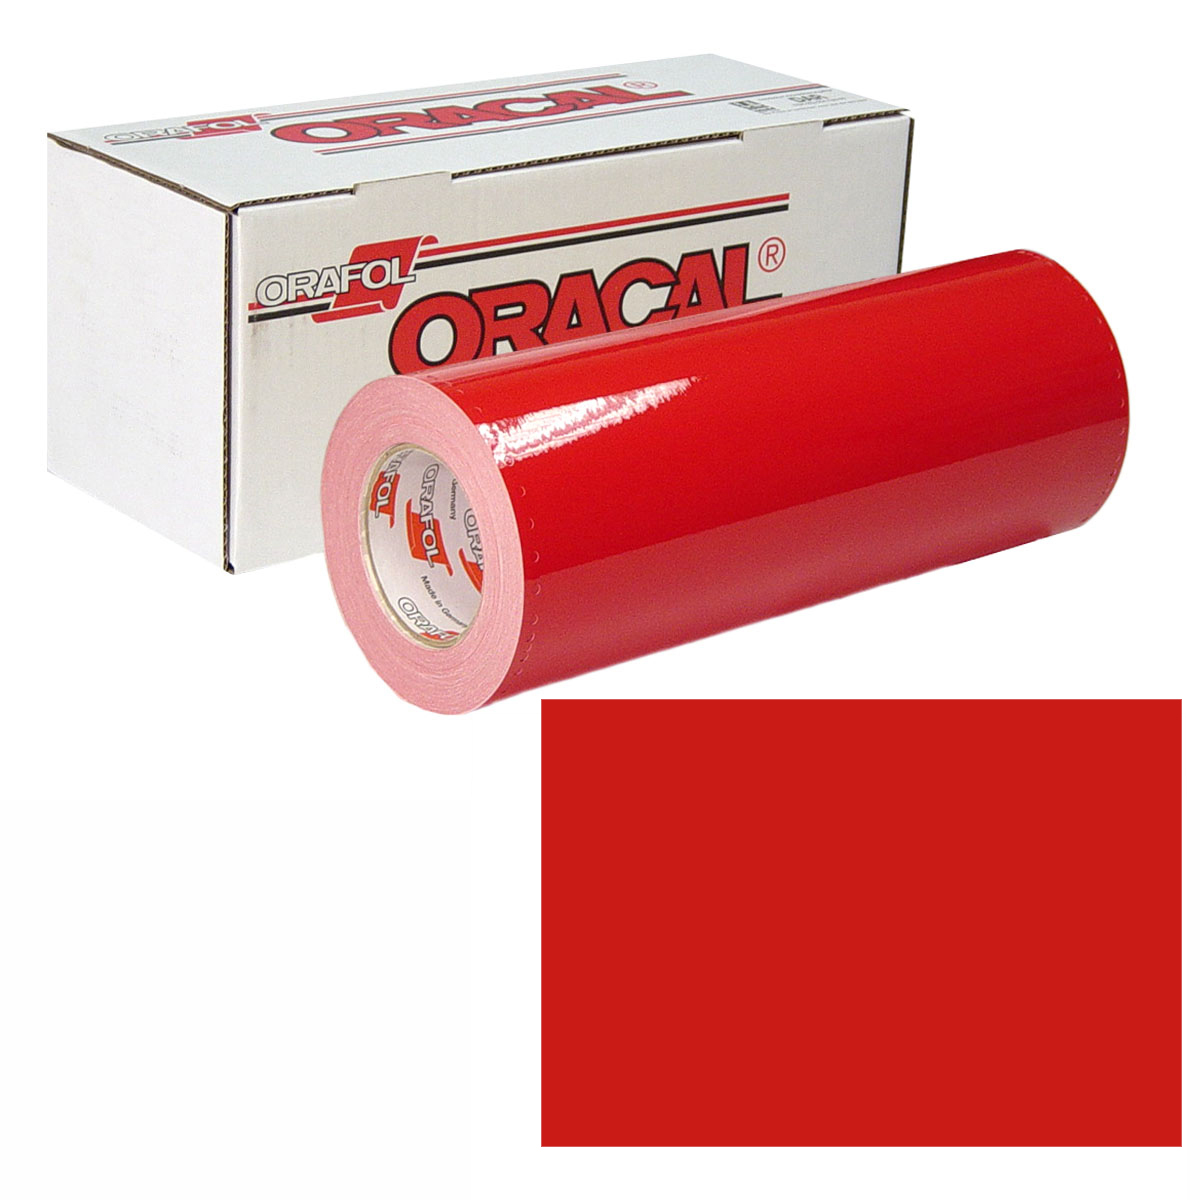 ORACAL 951 15in X 50yd 324 Blood Red